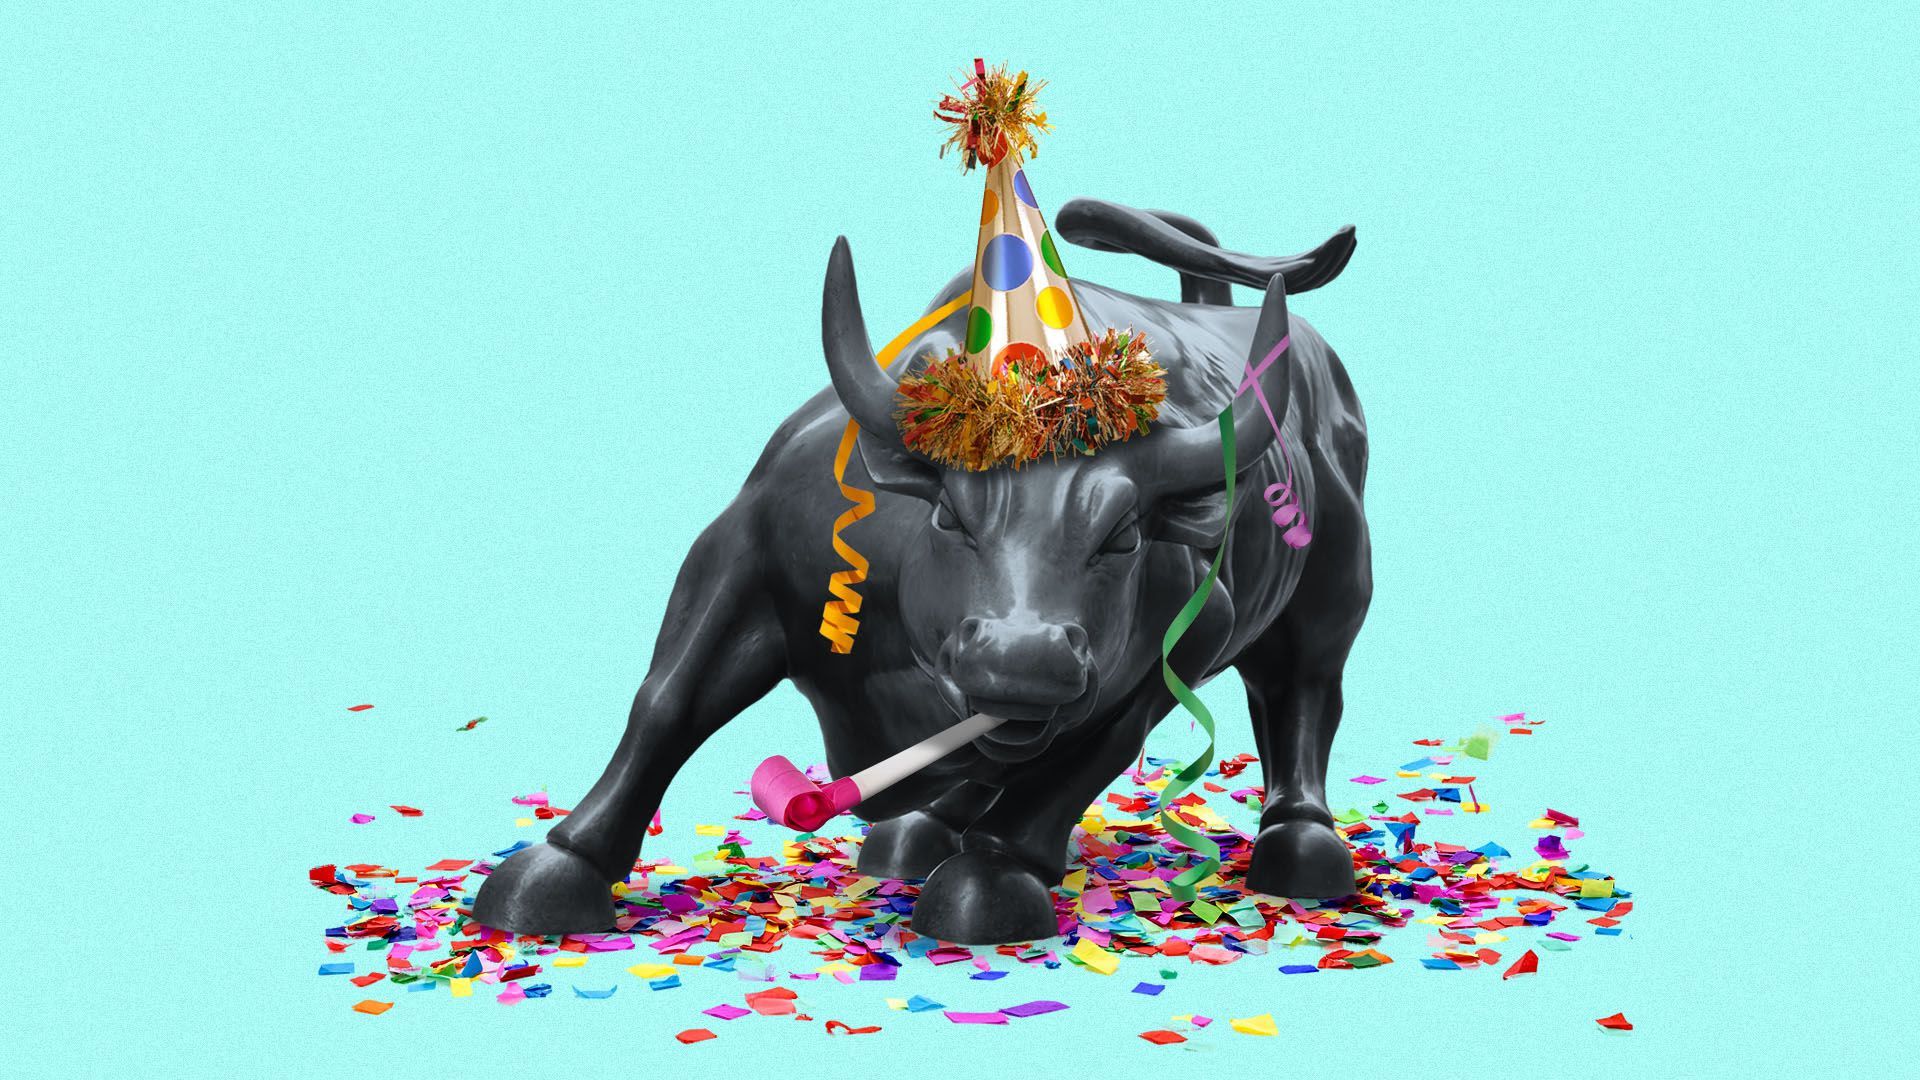 Illustration of bull statue with confetti and party hat